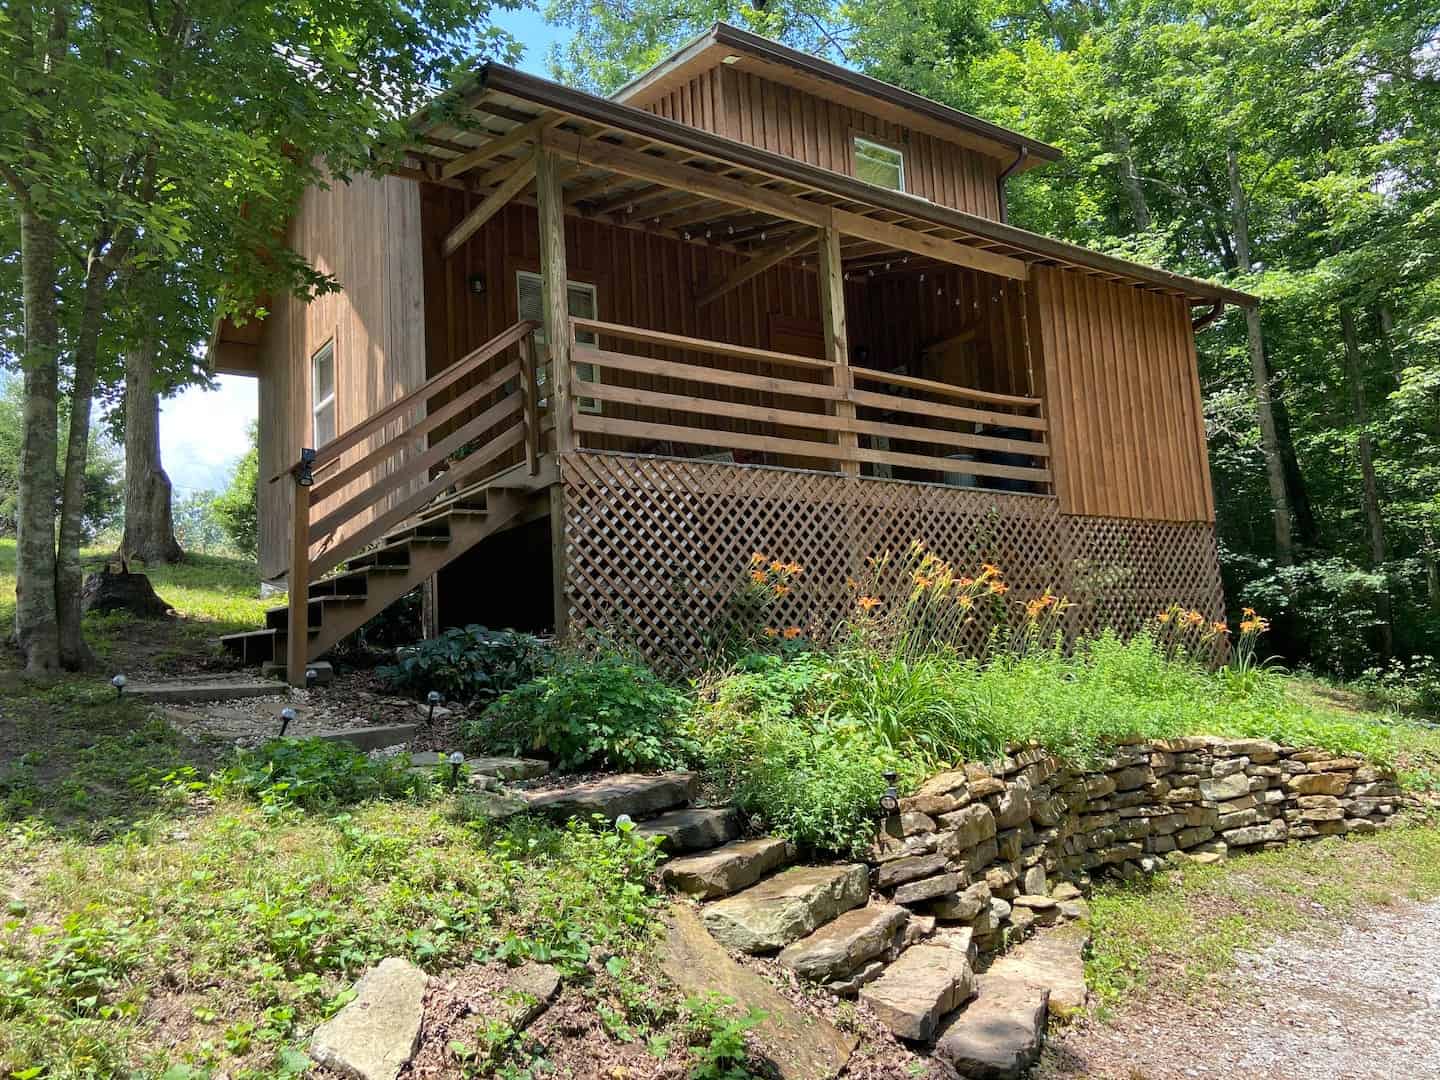 Image of cabin rental in Tennessee